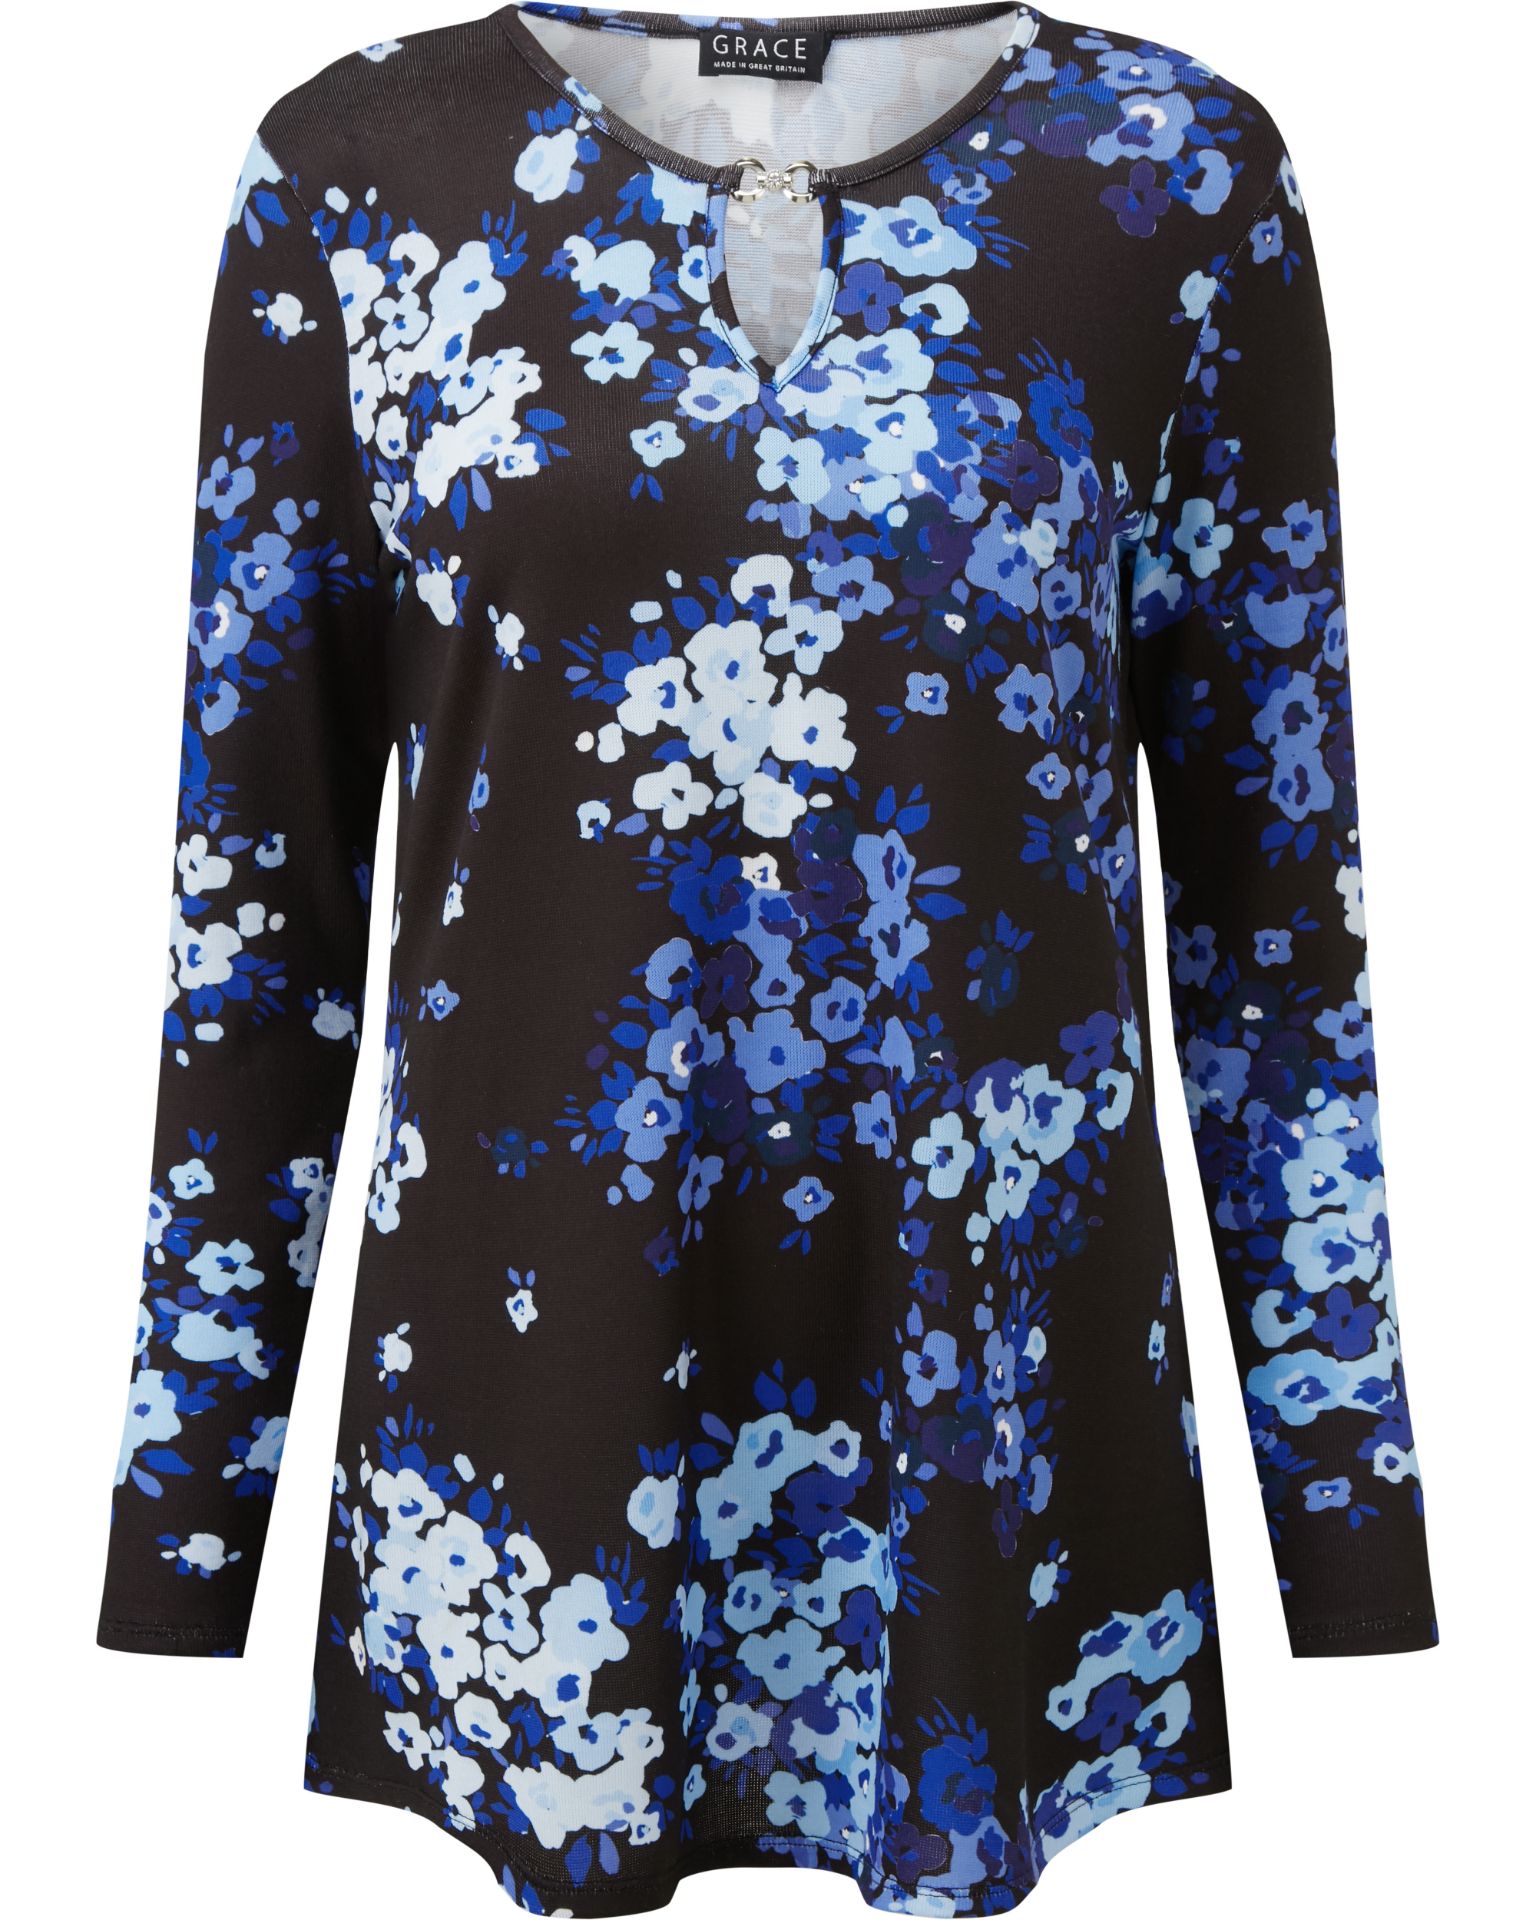 *Thirty Three Black & Blue Floral Blouses by Grace